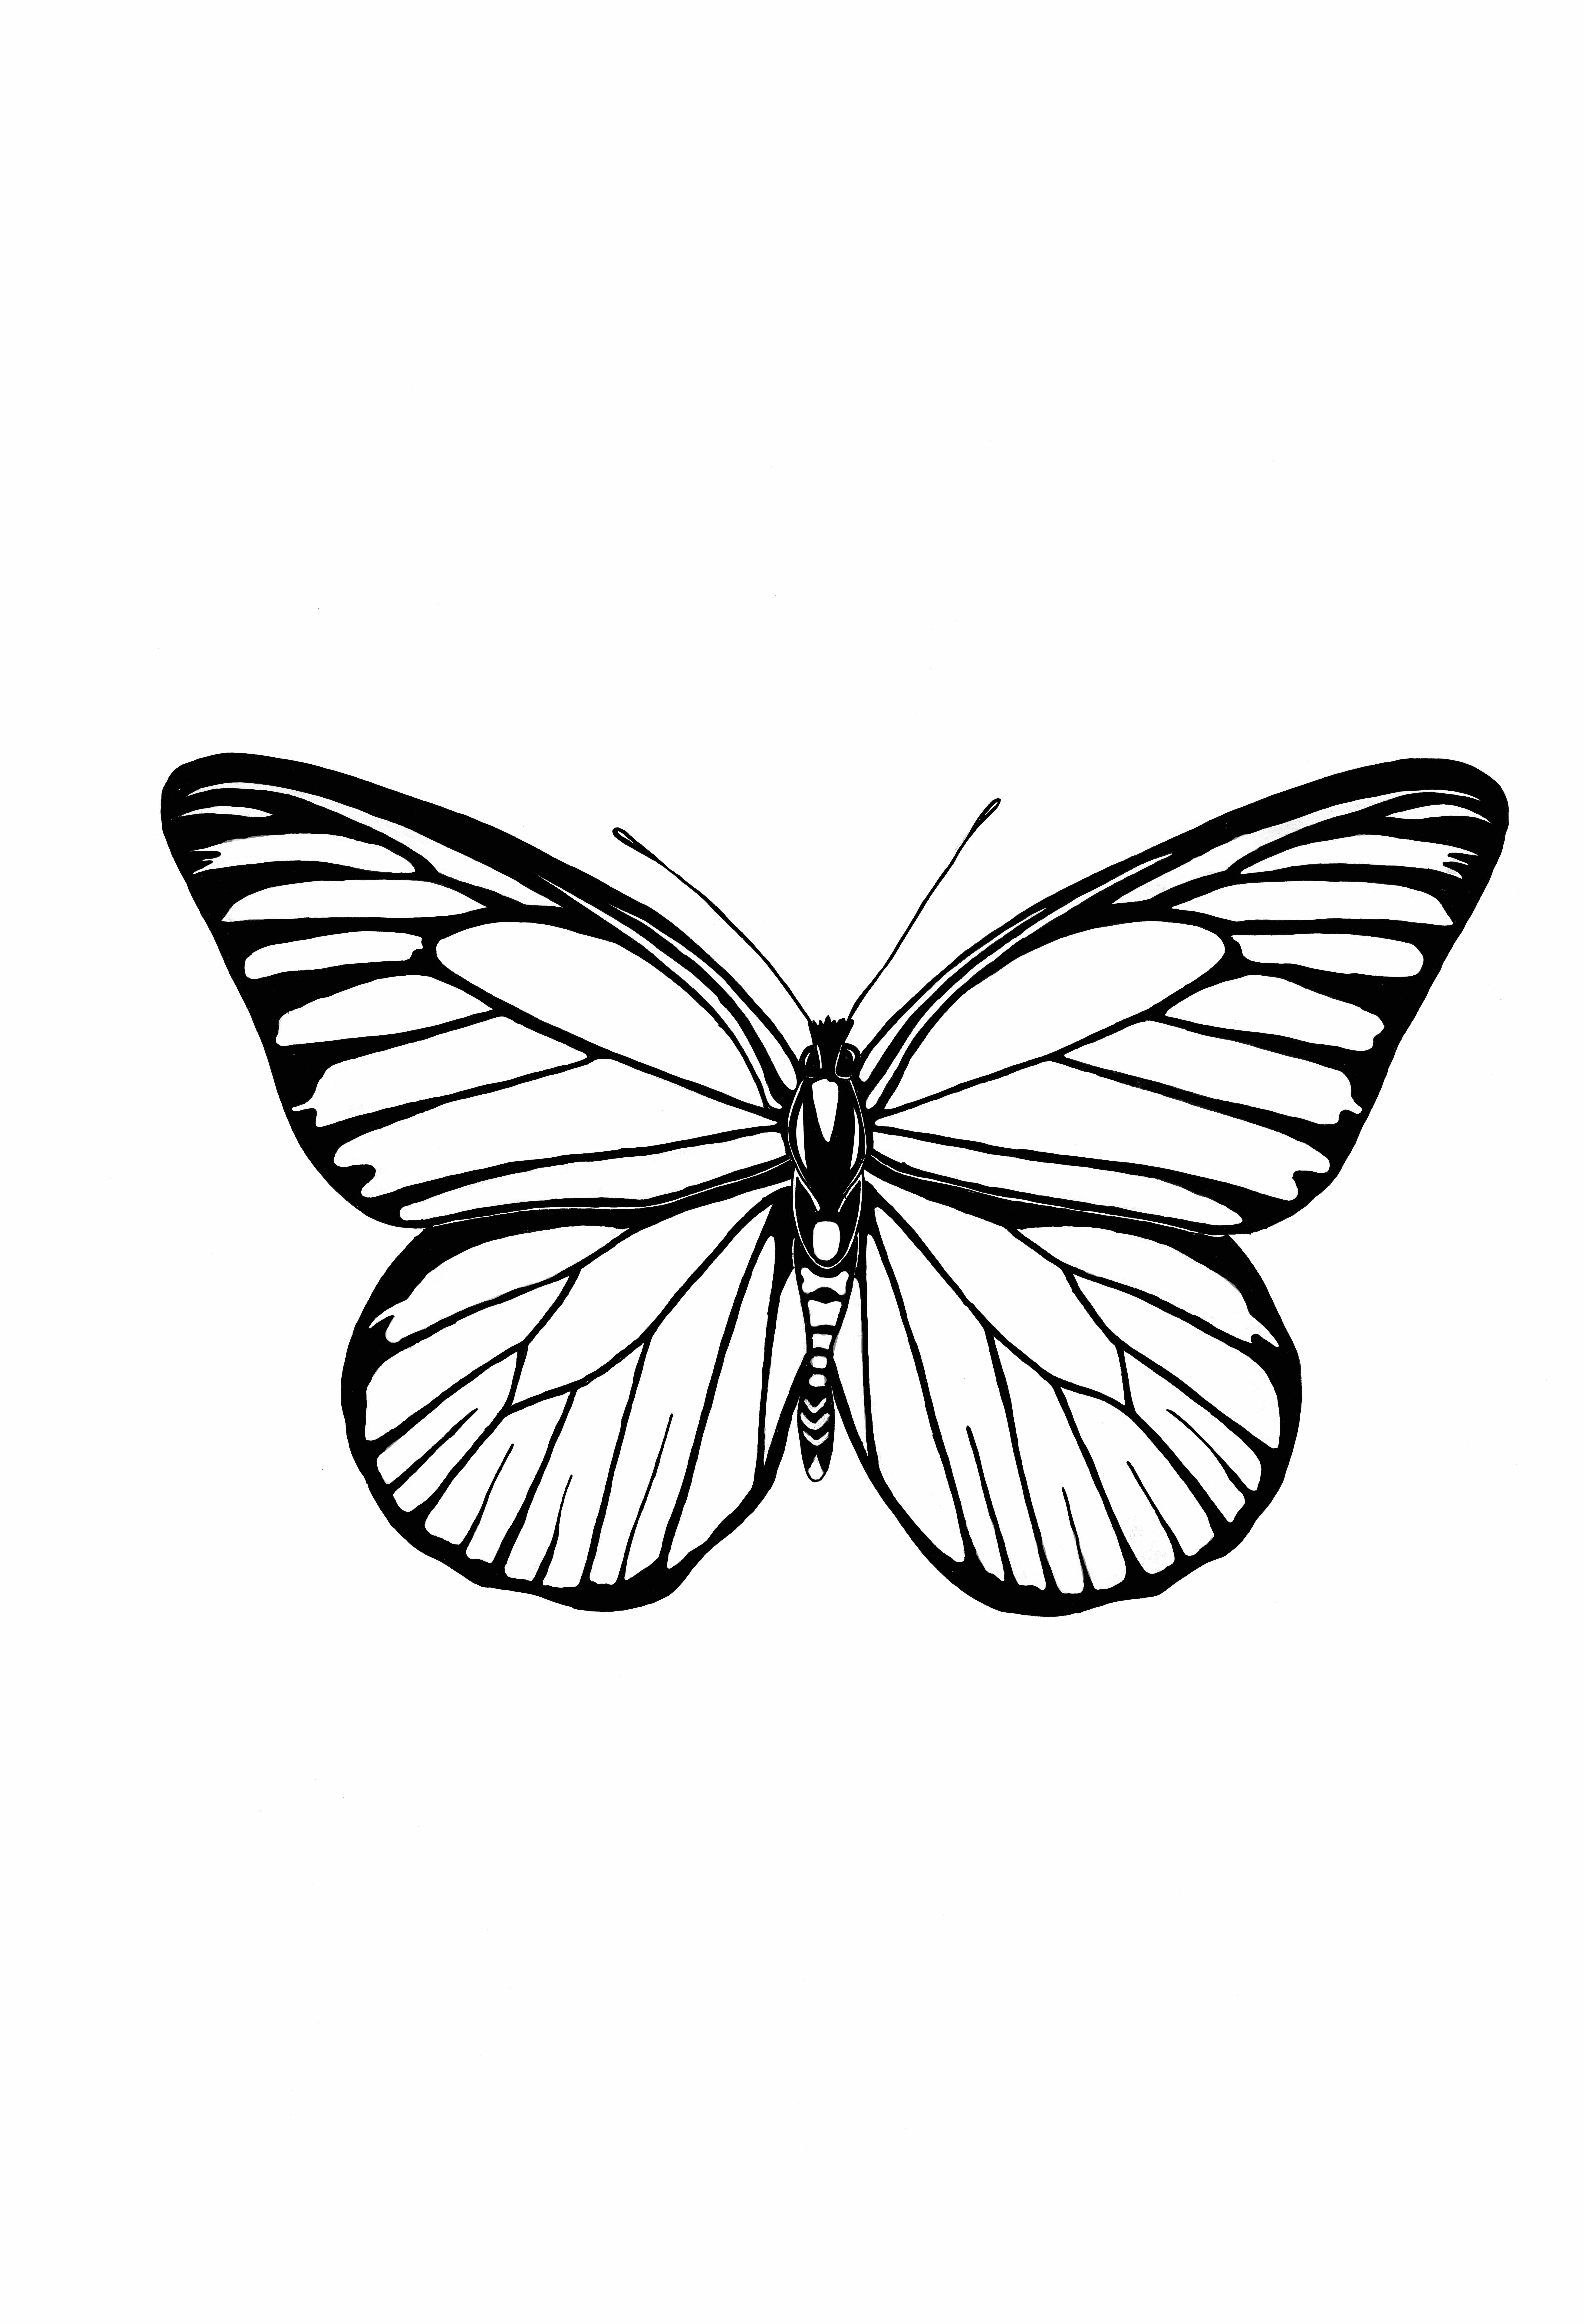 Butterfly 5 | Ink Drawing by Debbie New